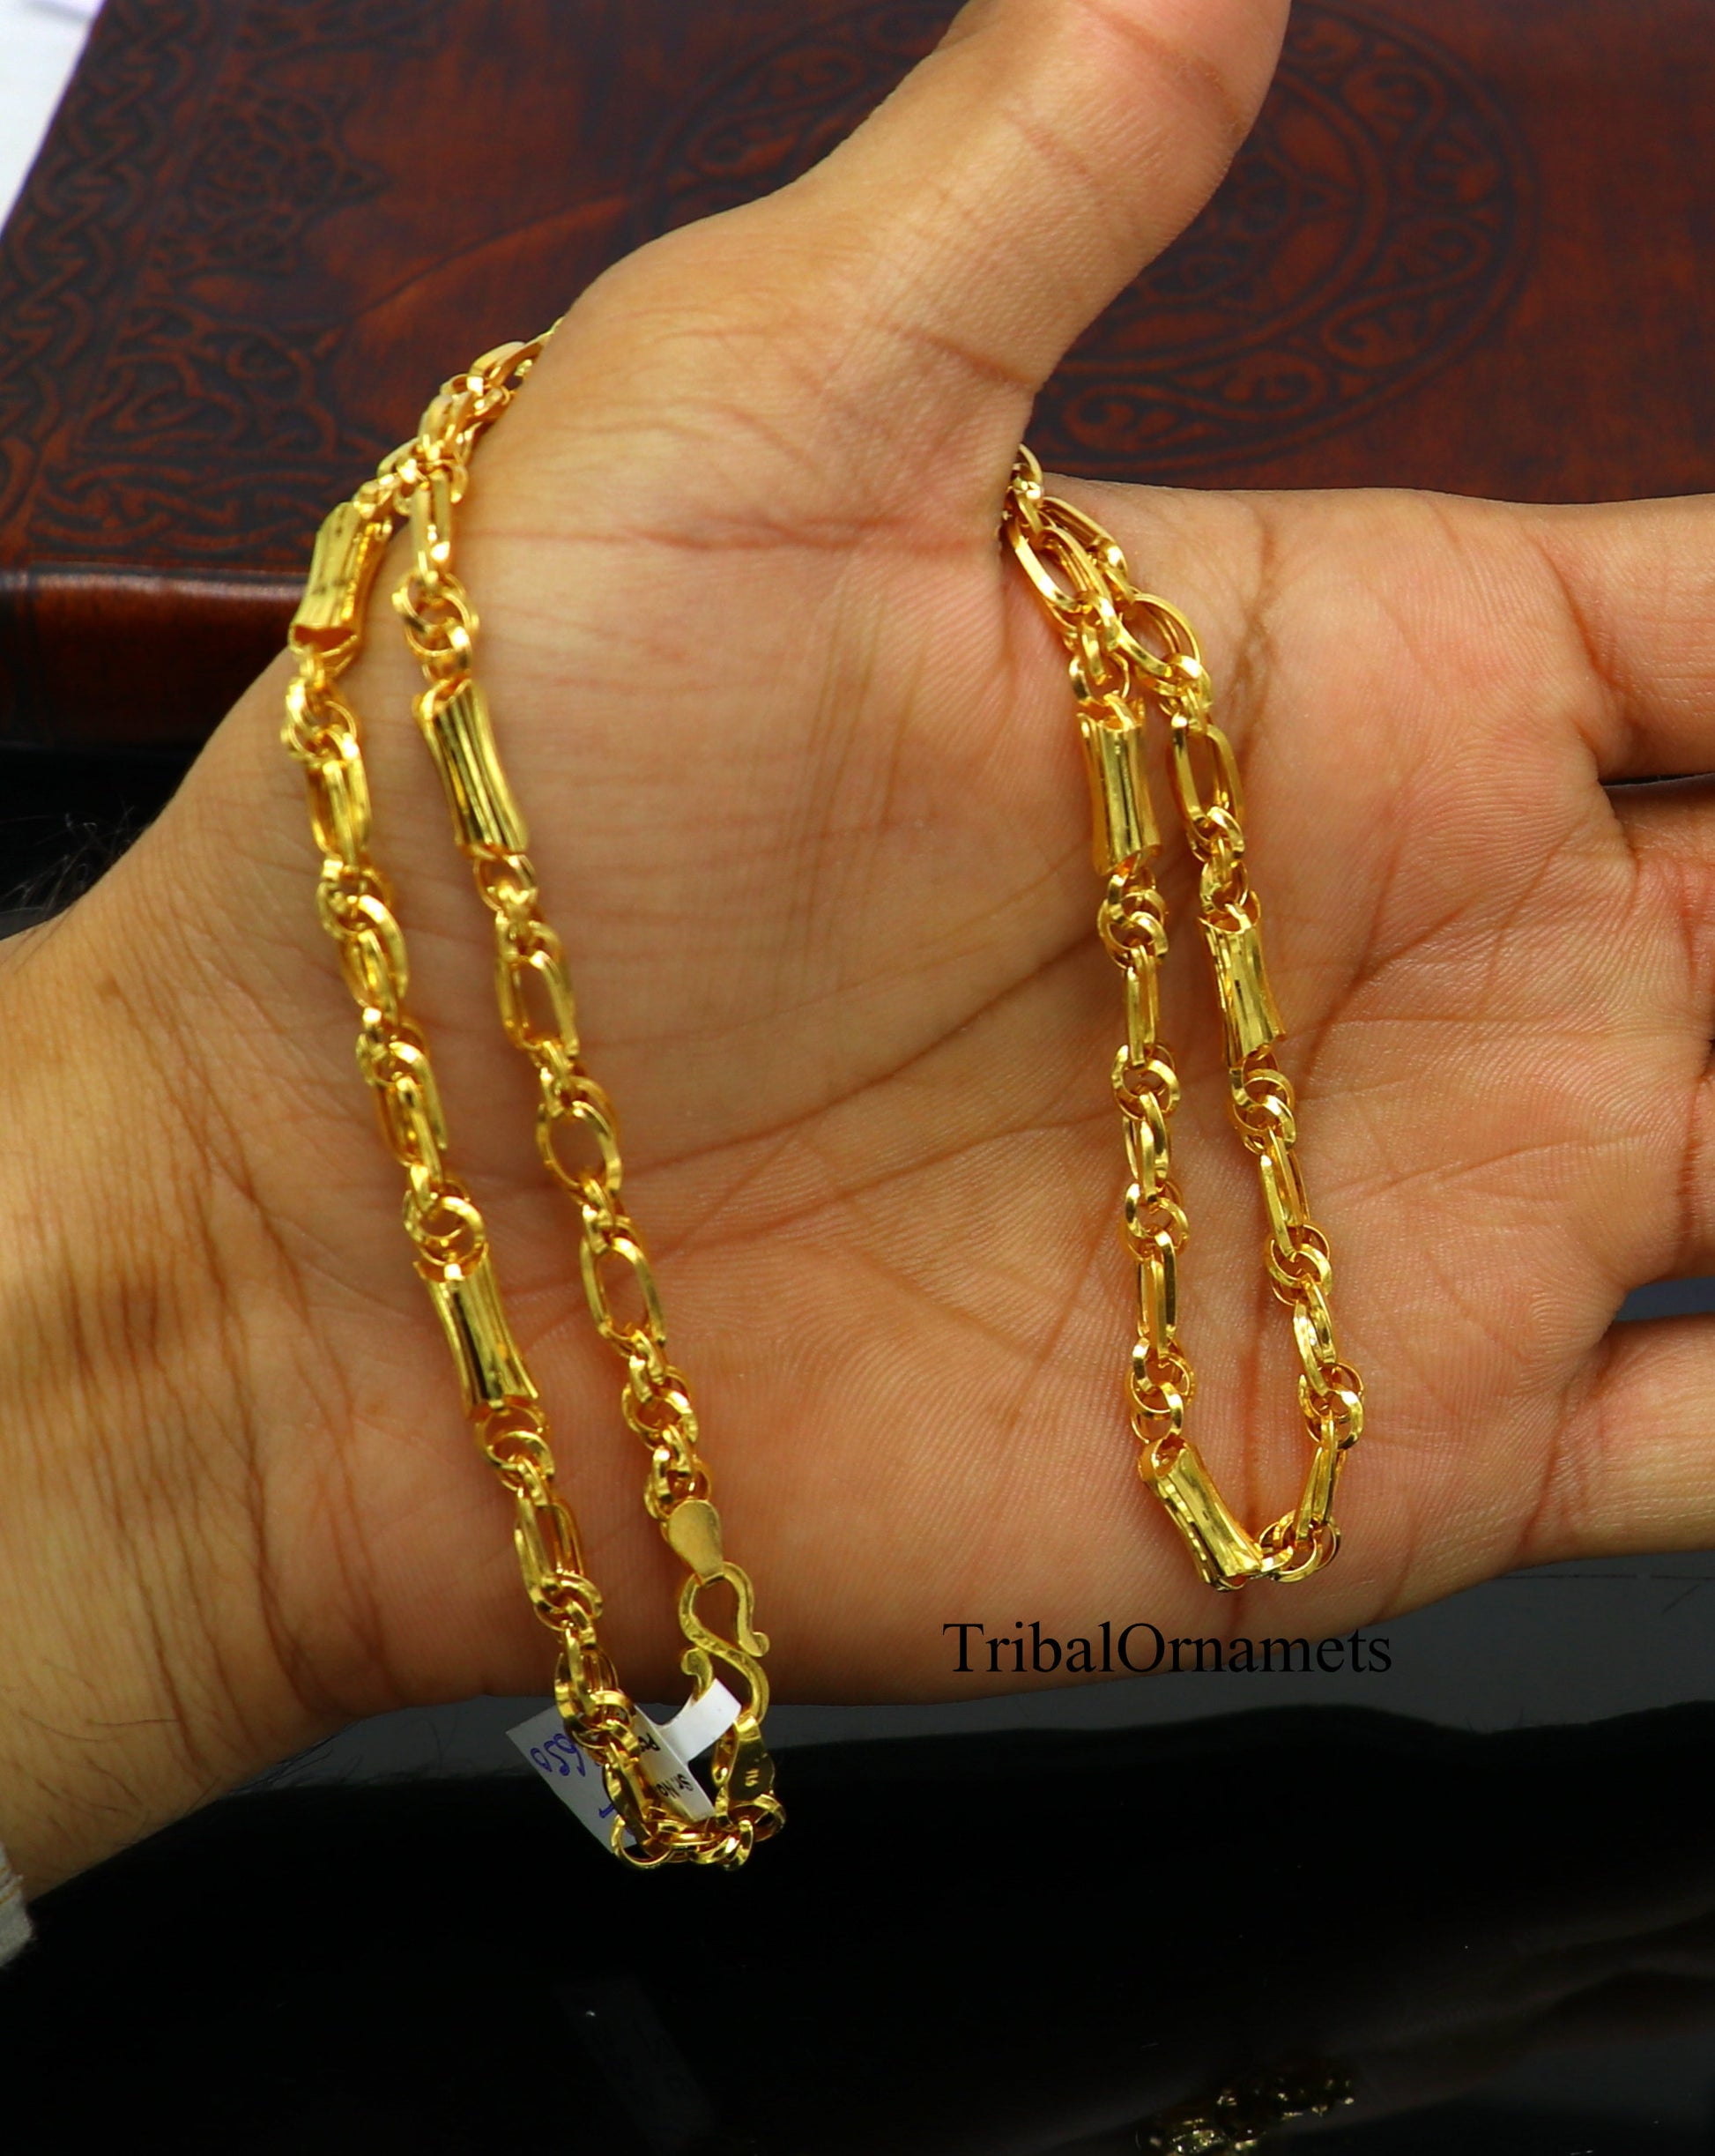 22kt yellow gold indian unique style handmade customized link chain, elegant personalized gifting unisex best necklace from india ch239 - TRIBAL ORNAMENTS